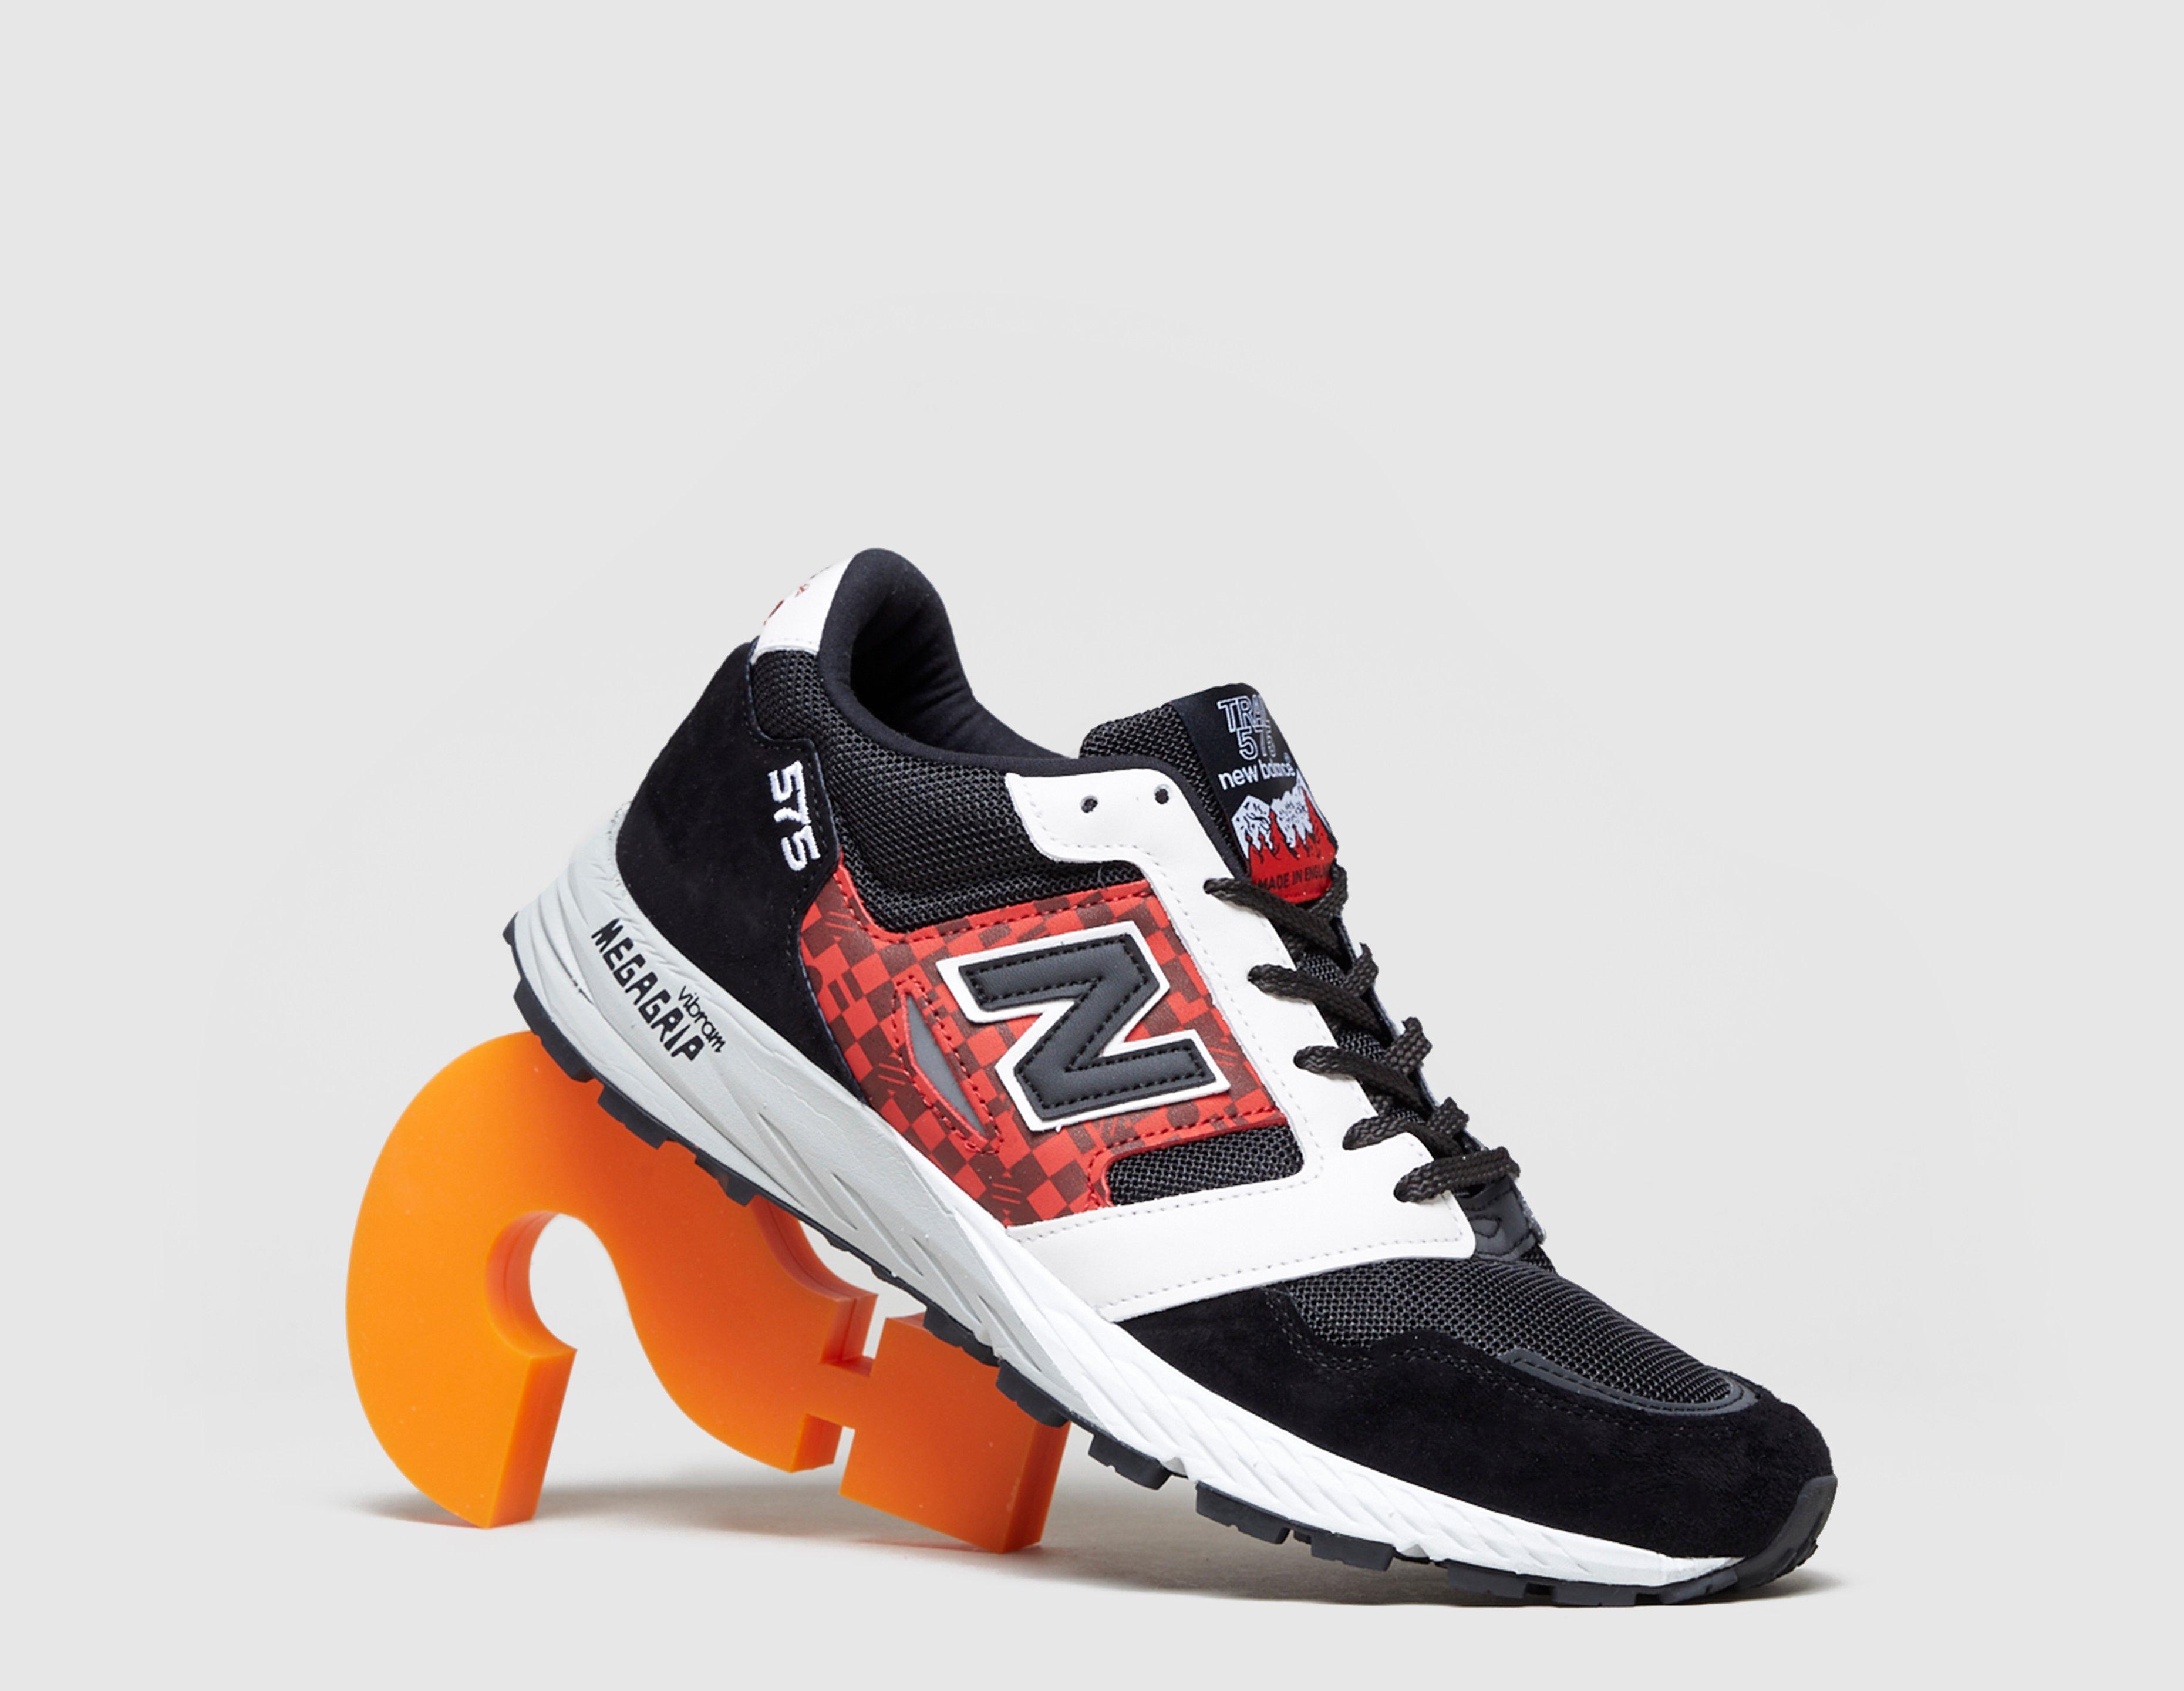 new balance 575 made in uk